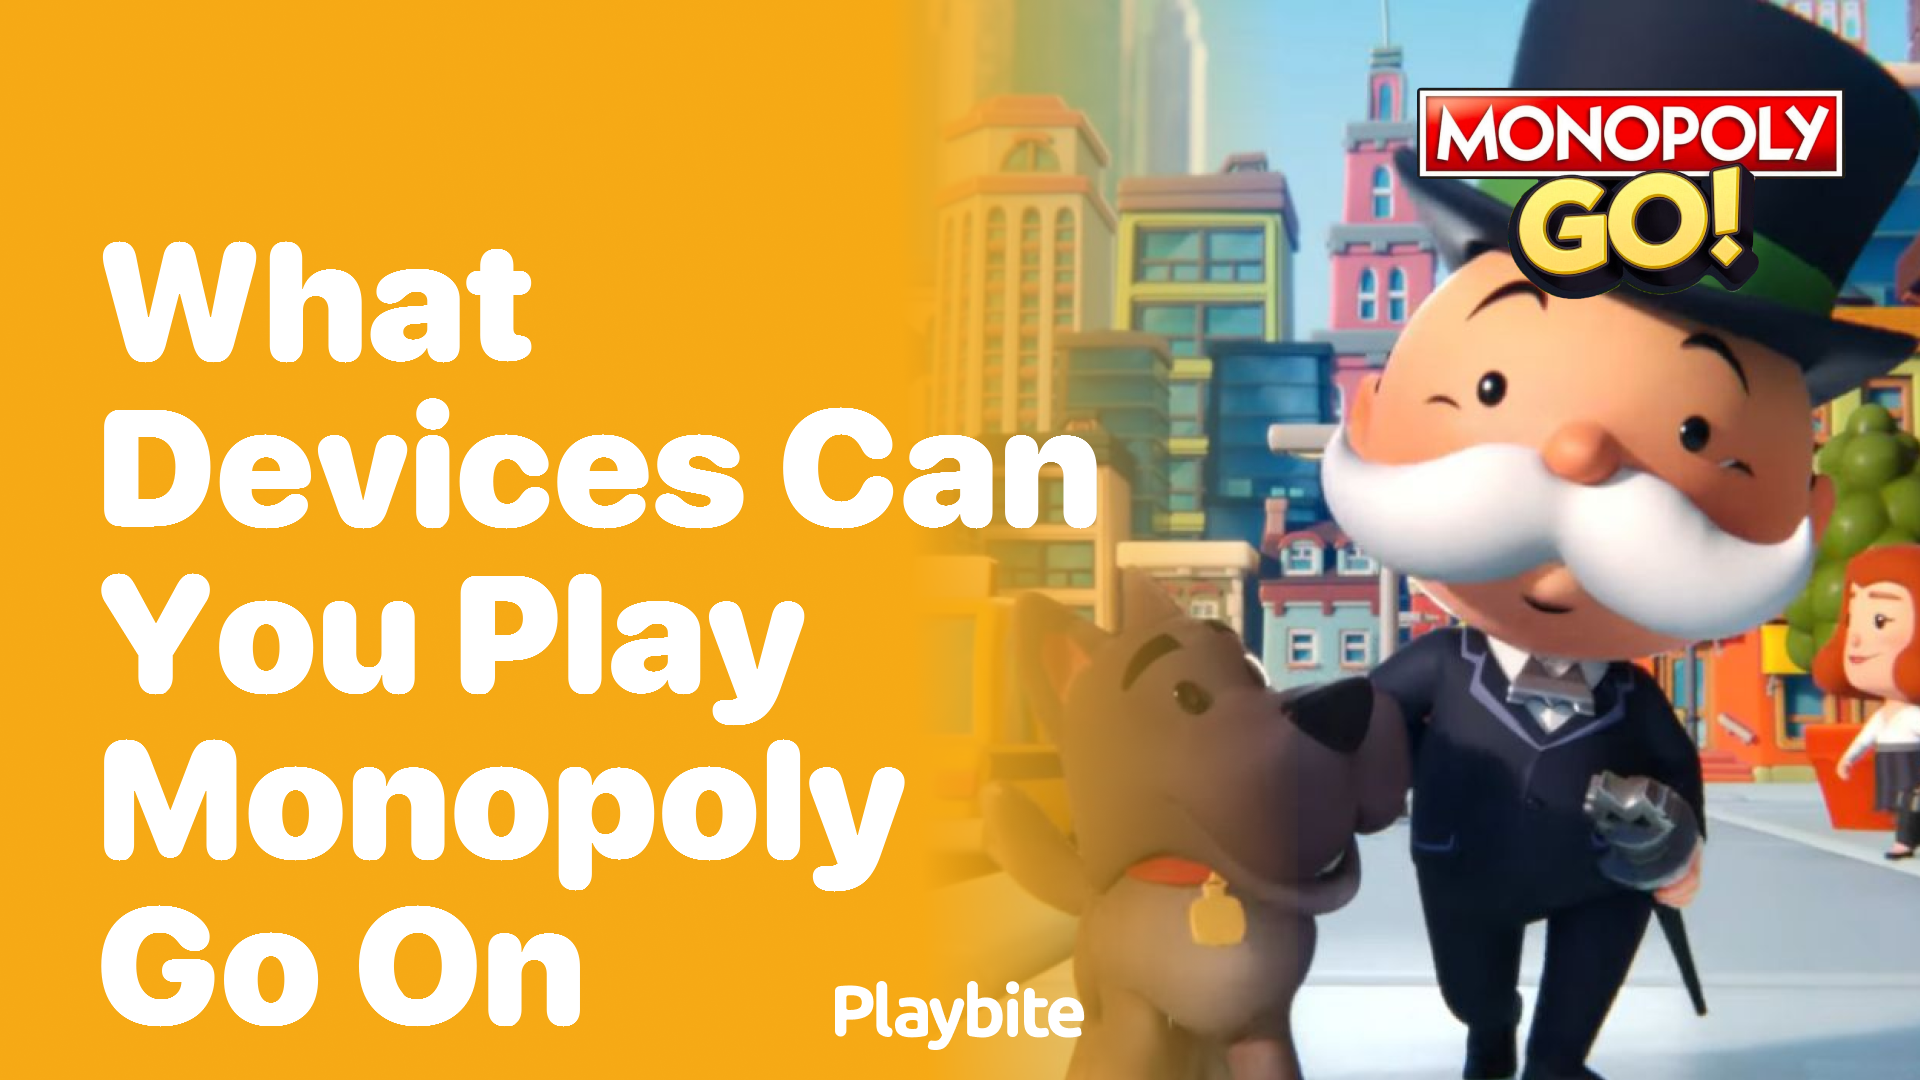 What Devices Can You Play Monopoly Go On?